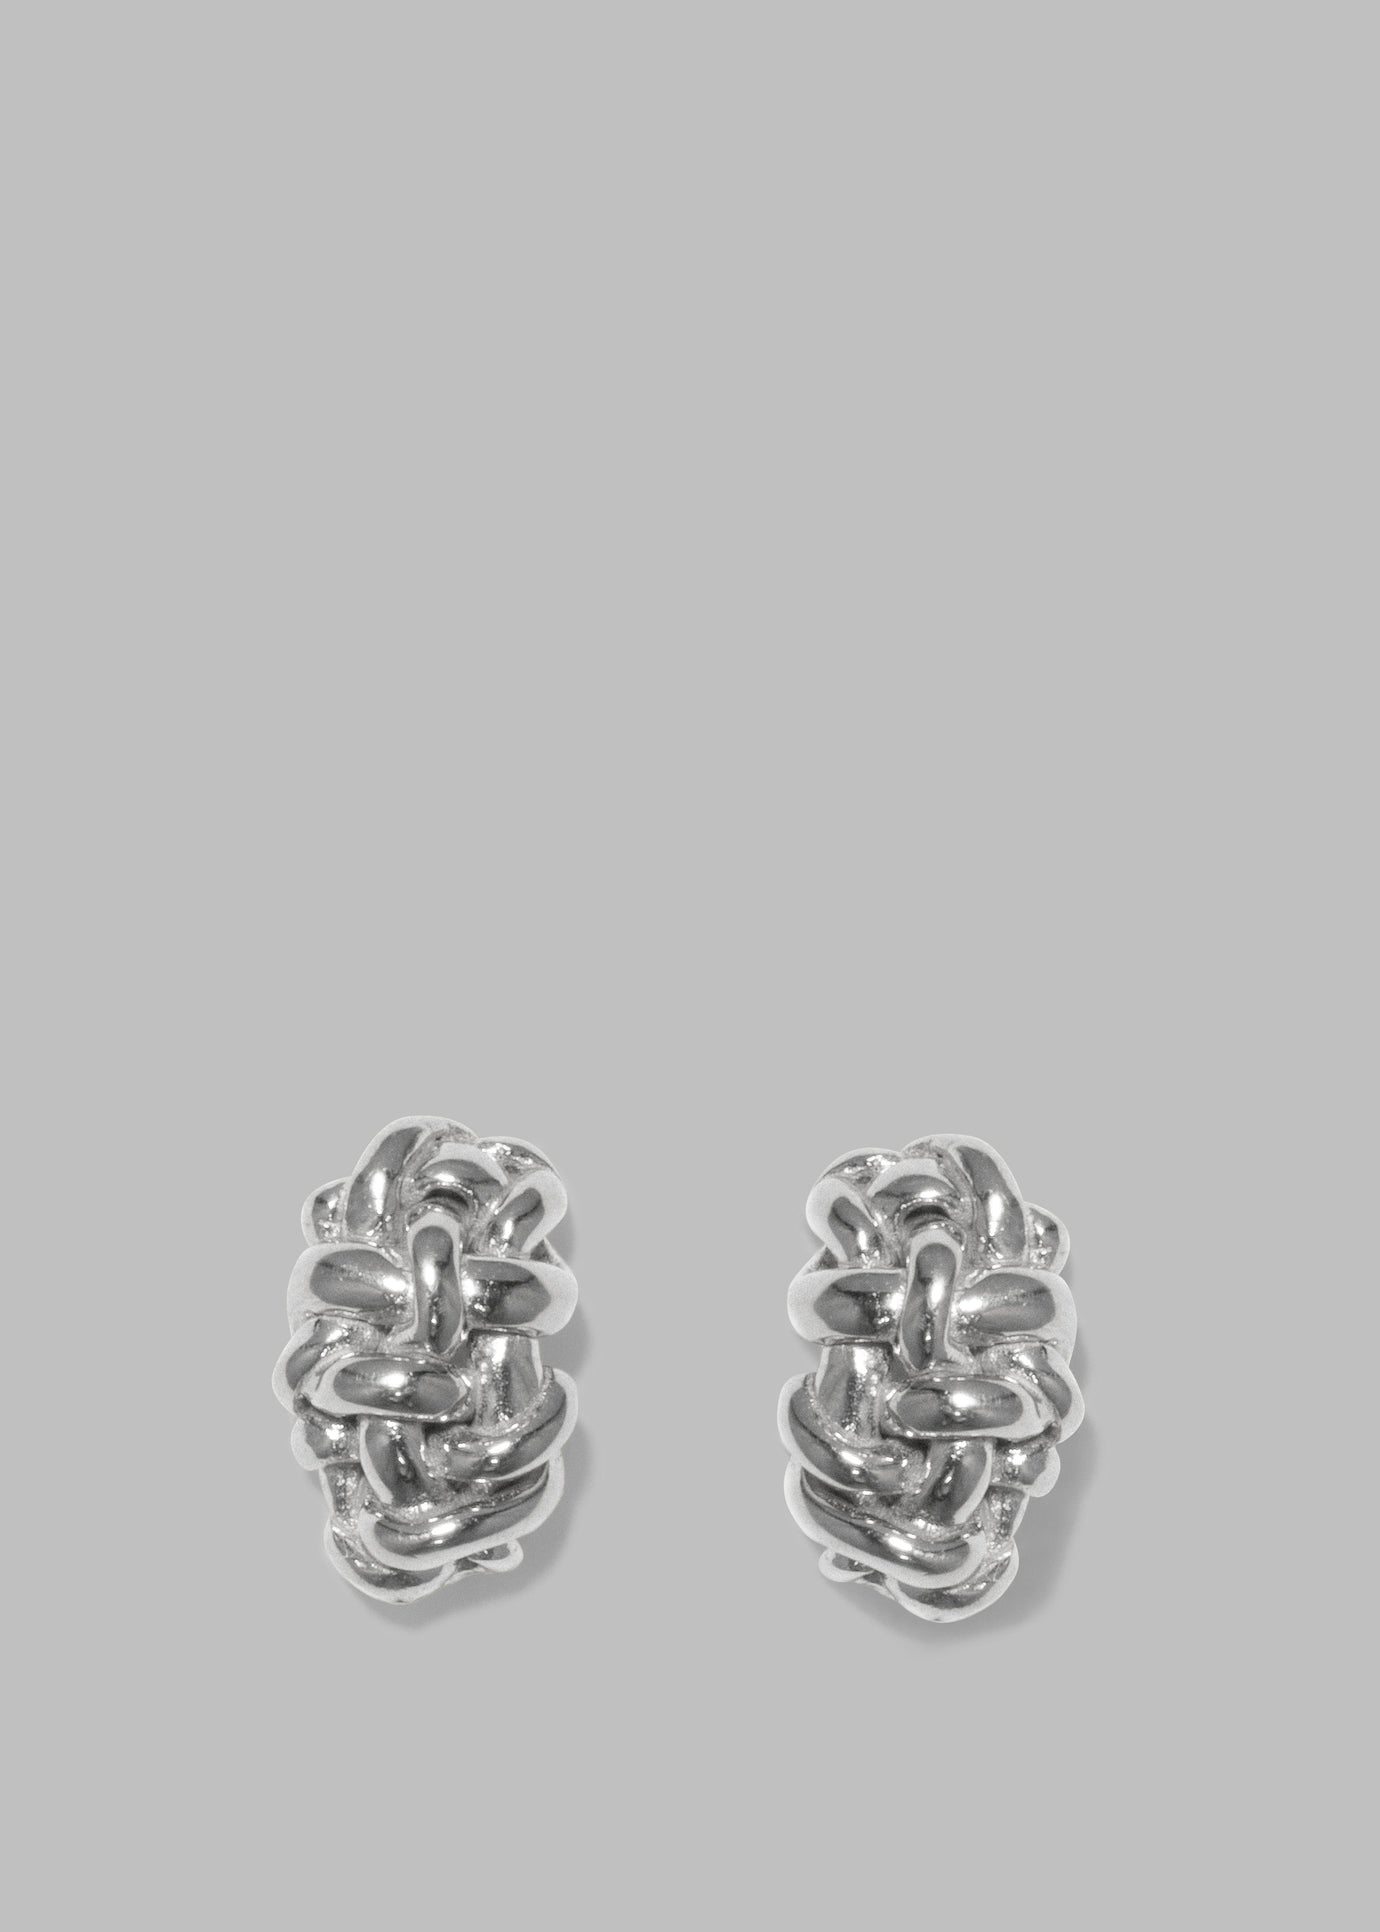 Completedworks The Paths of Memory Earrings - Rhodium Plated